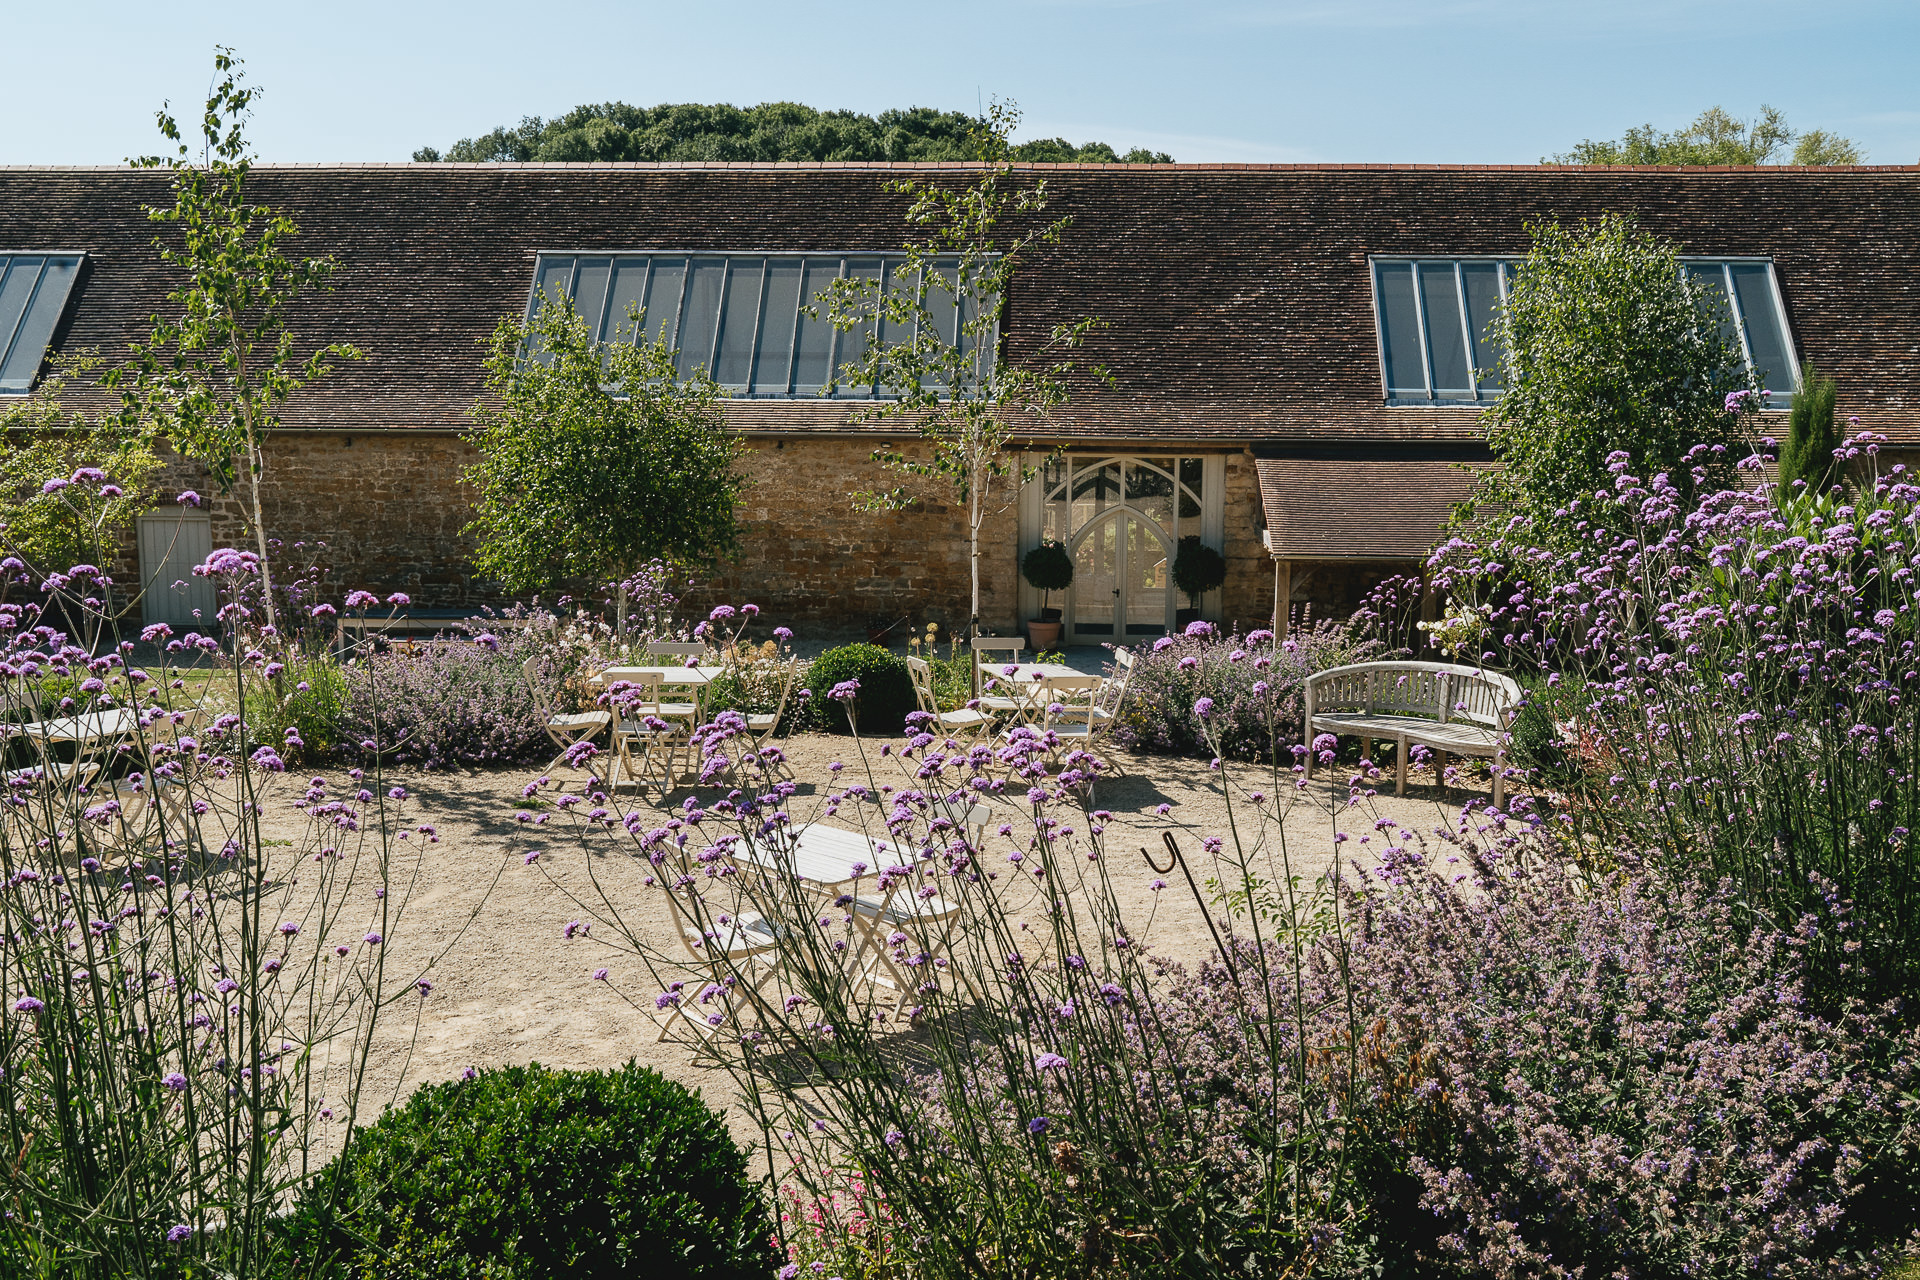 External image of the Tithe Barn, Symondsbury, ready for a wedding, with purple flowers in the foreground and blue skies above